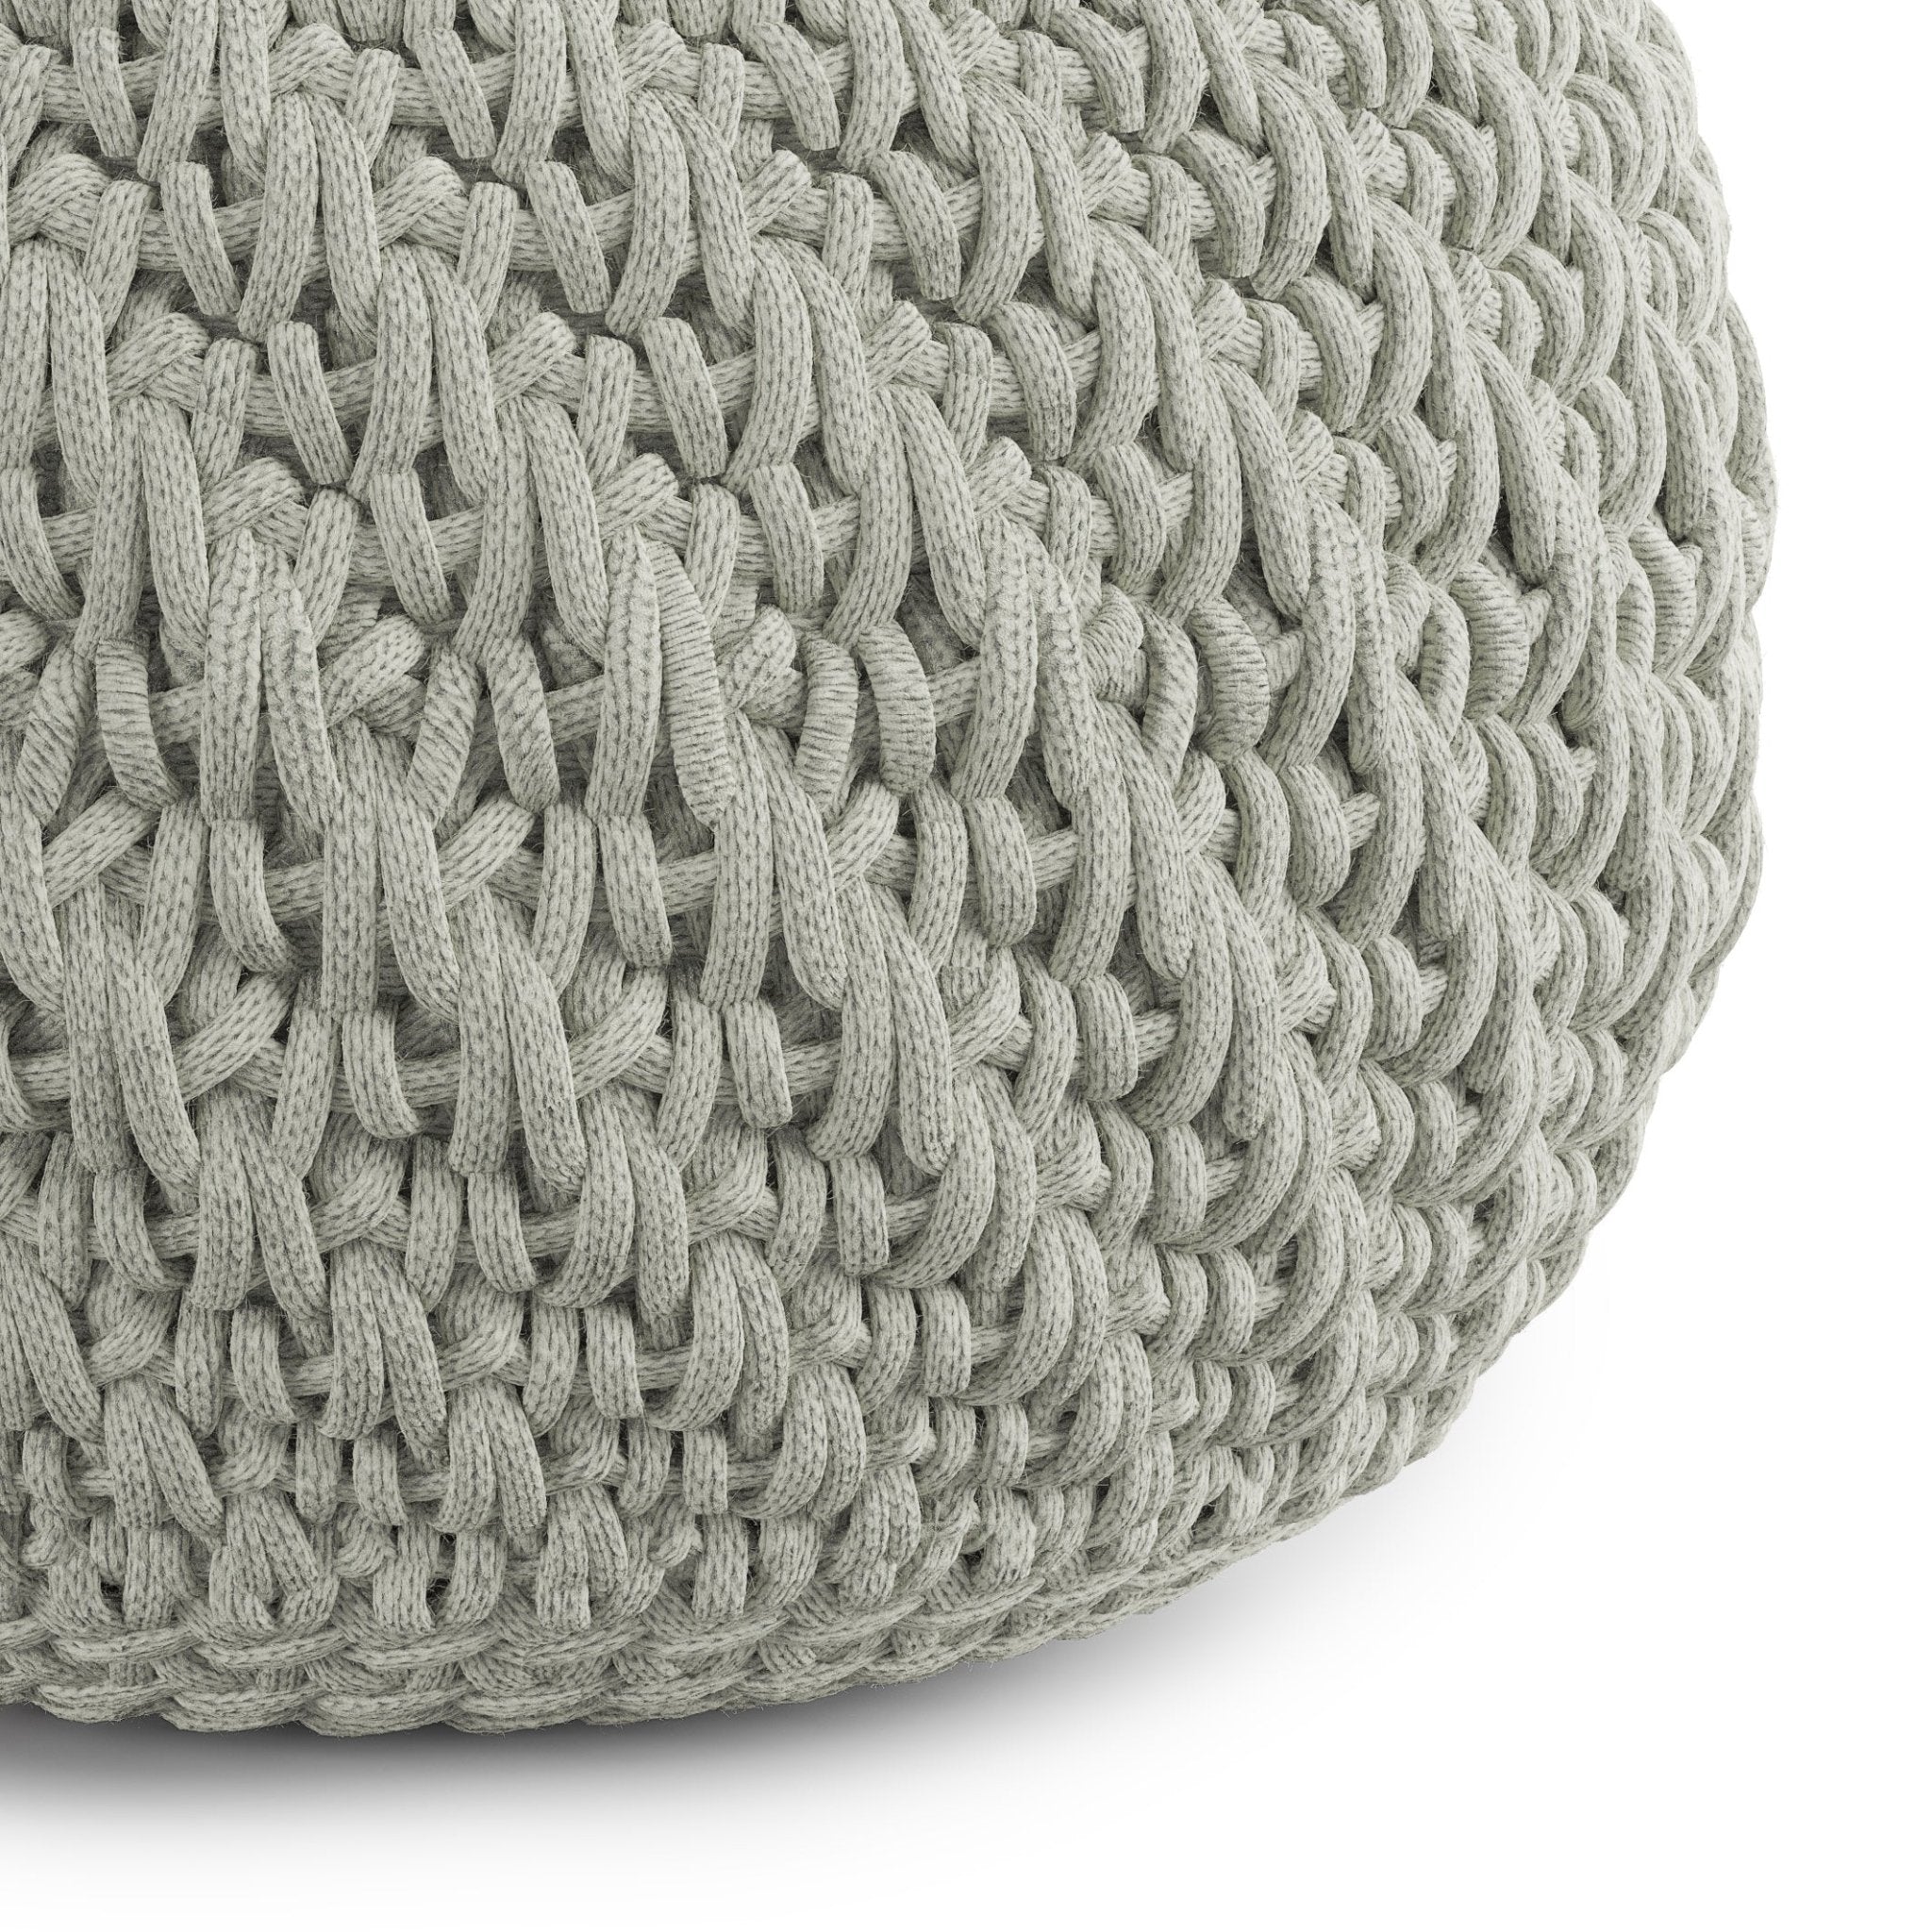 Round Knitted Pouf - Pouf